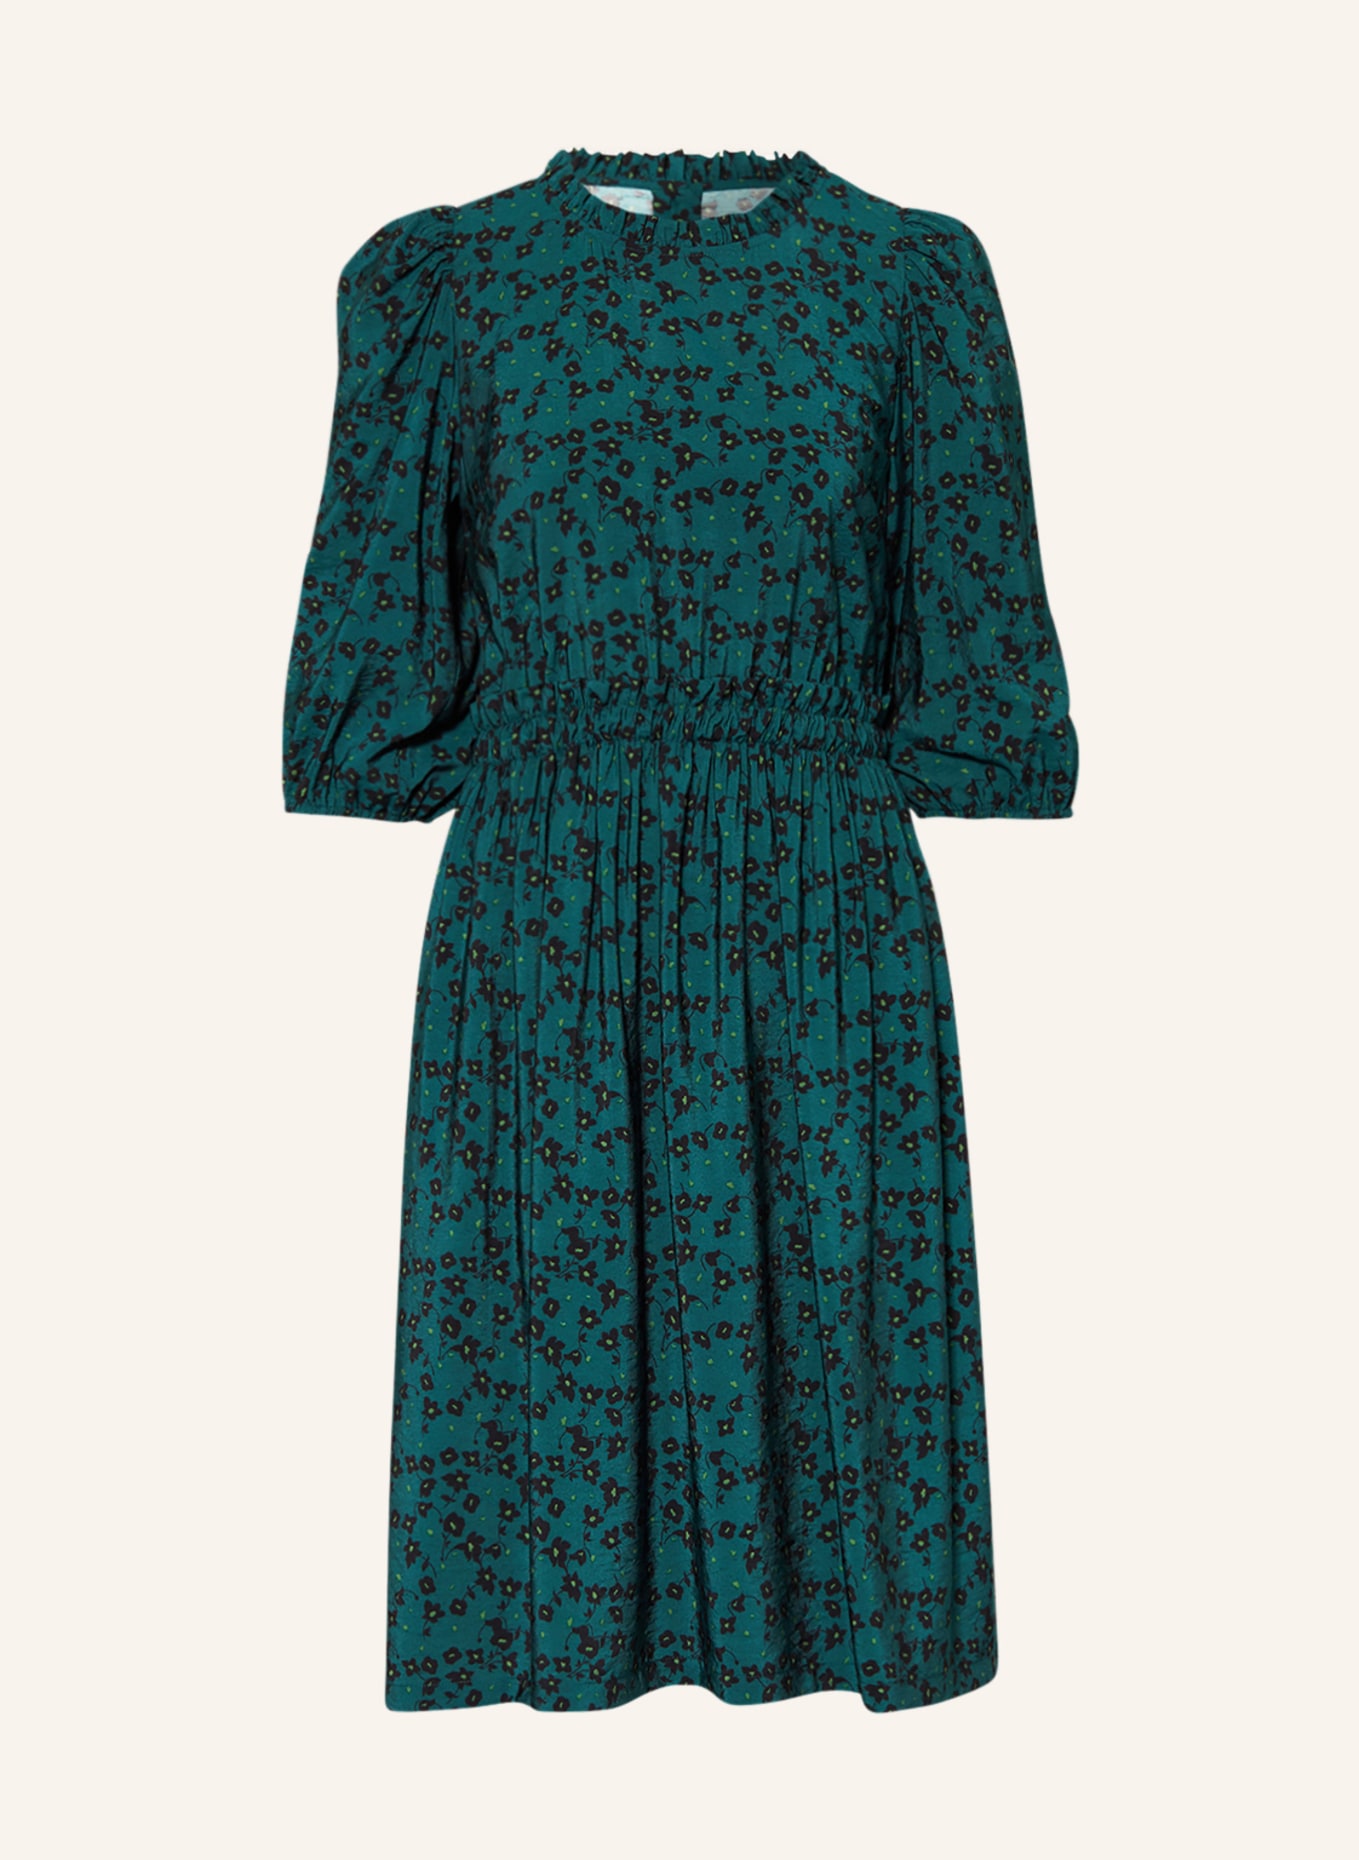 Marc O'Polo DENIM Dress with 3/4 sleeves, Color: TEAL/ LIGHT GREEN/ BLACK (Image 1)